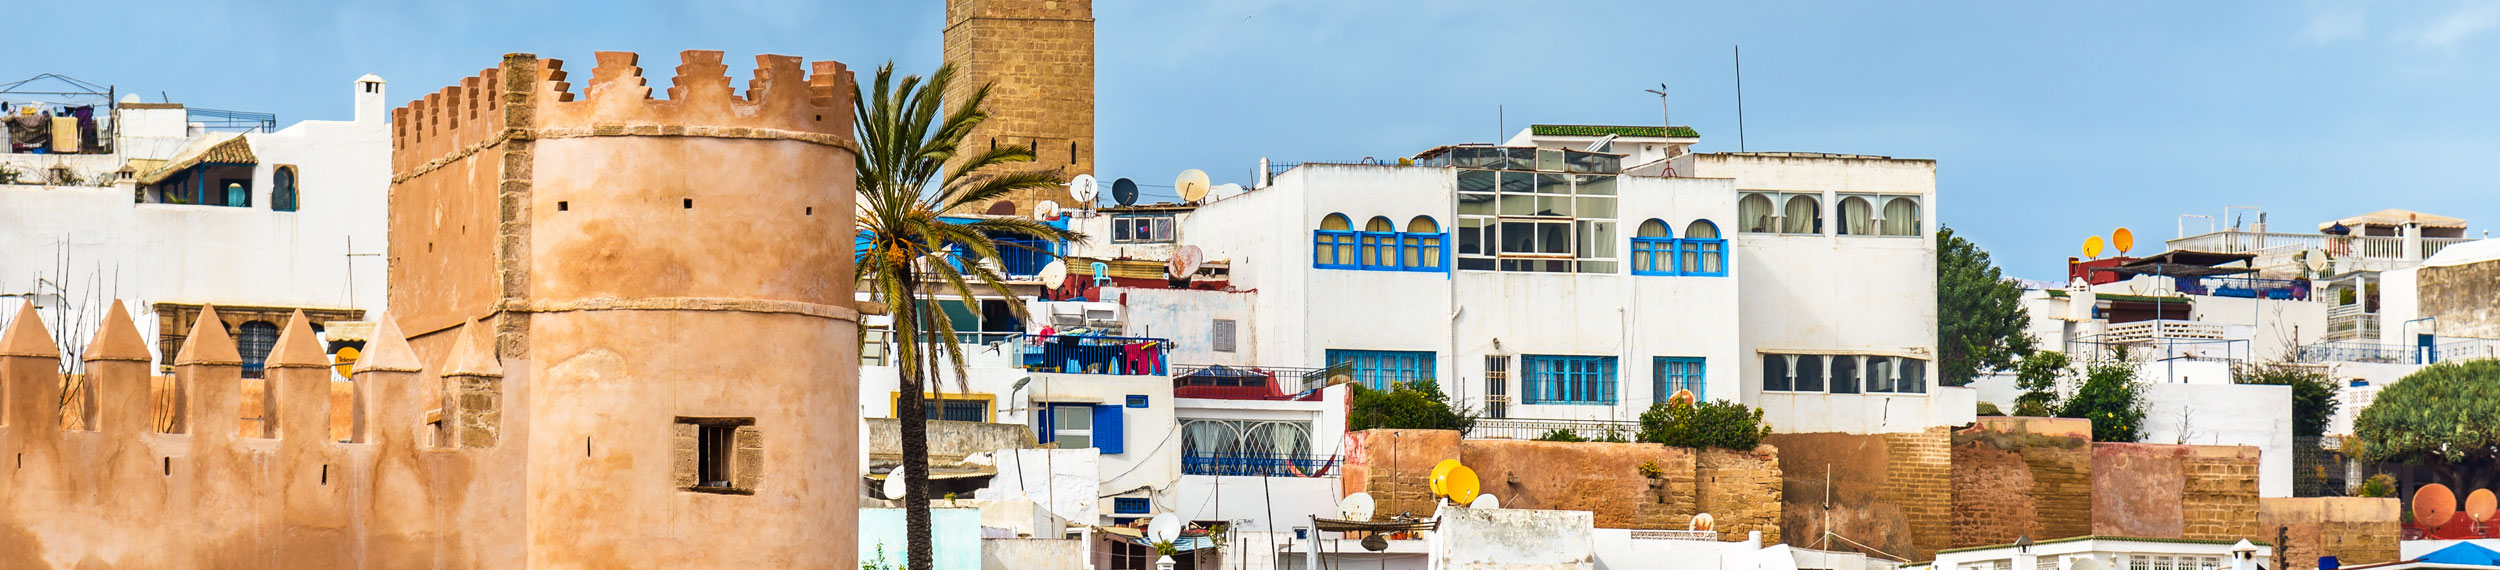 View of the Kasbah of the Udayas, a tan wall in the foreground and houses in the background with a palm tree and houses in the background in Rabat, Morocco.